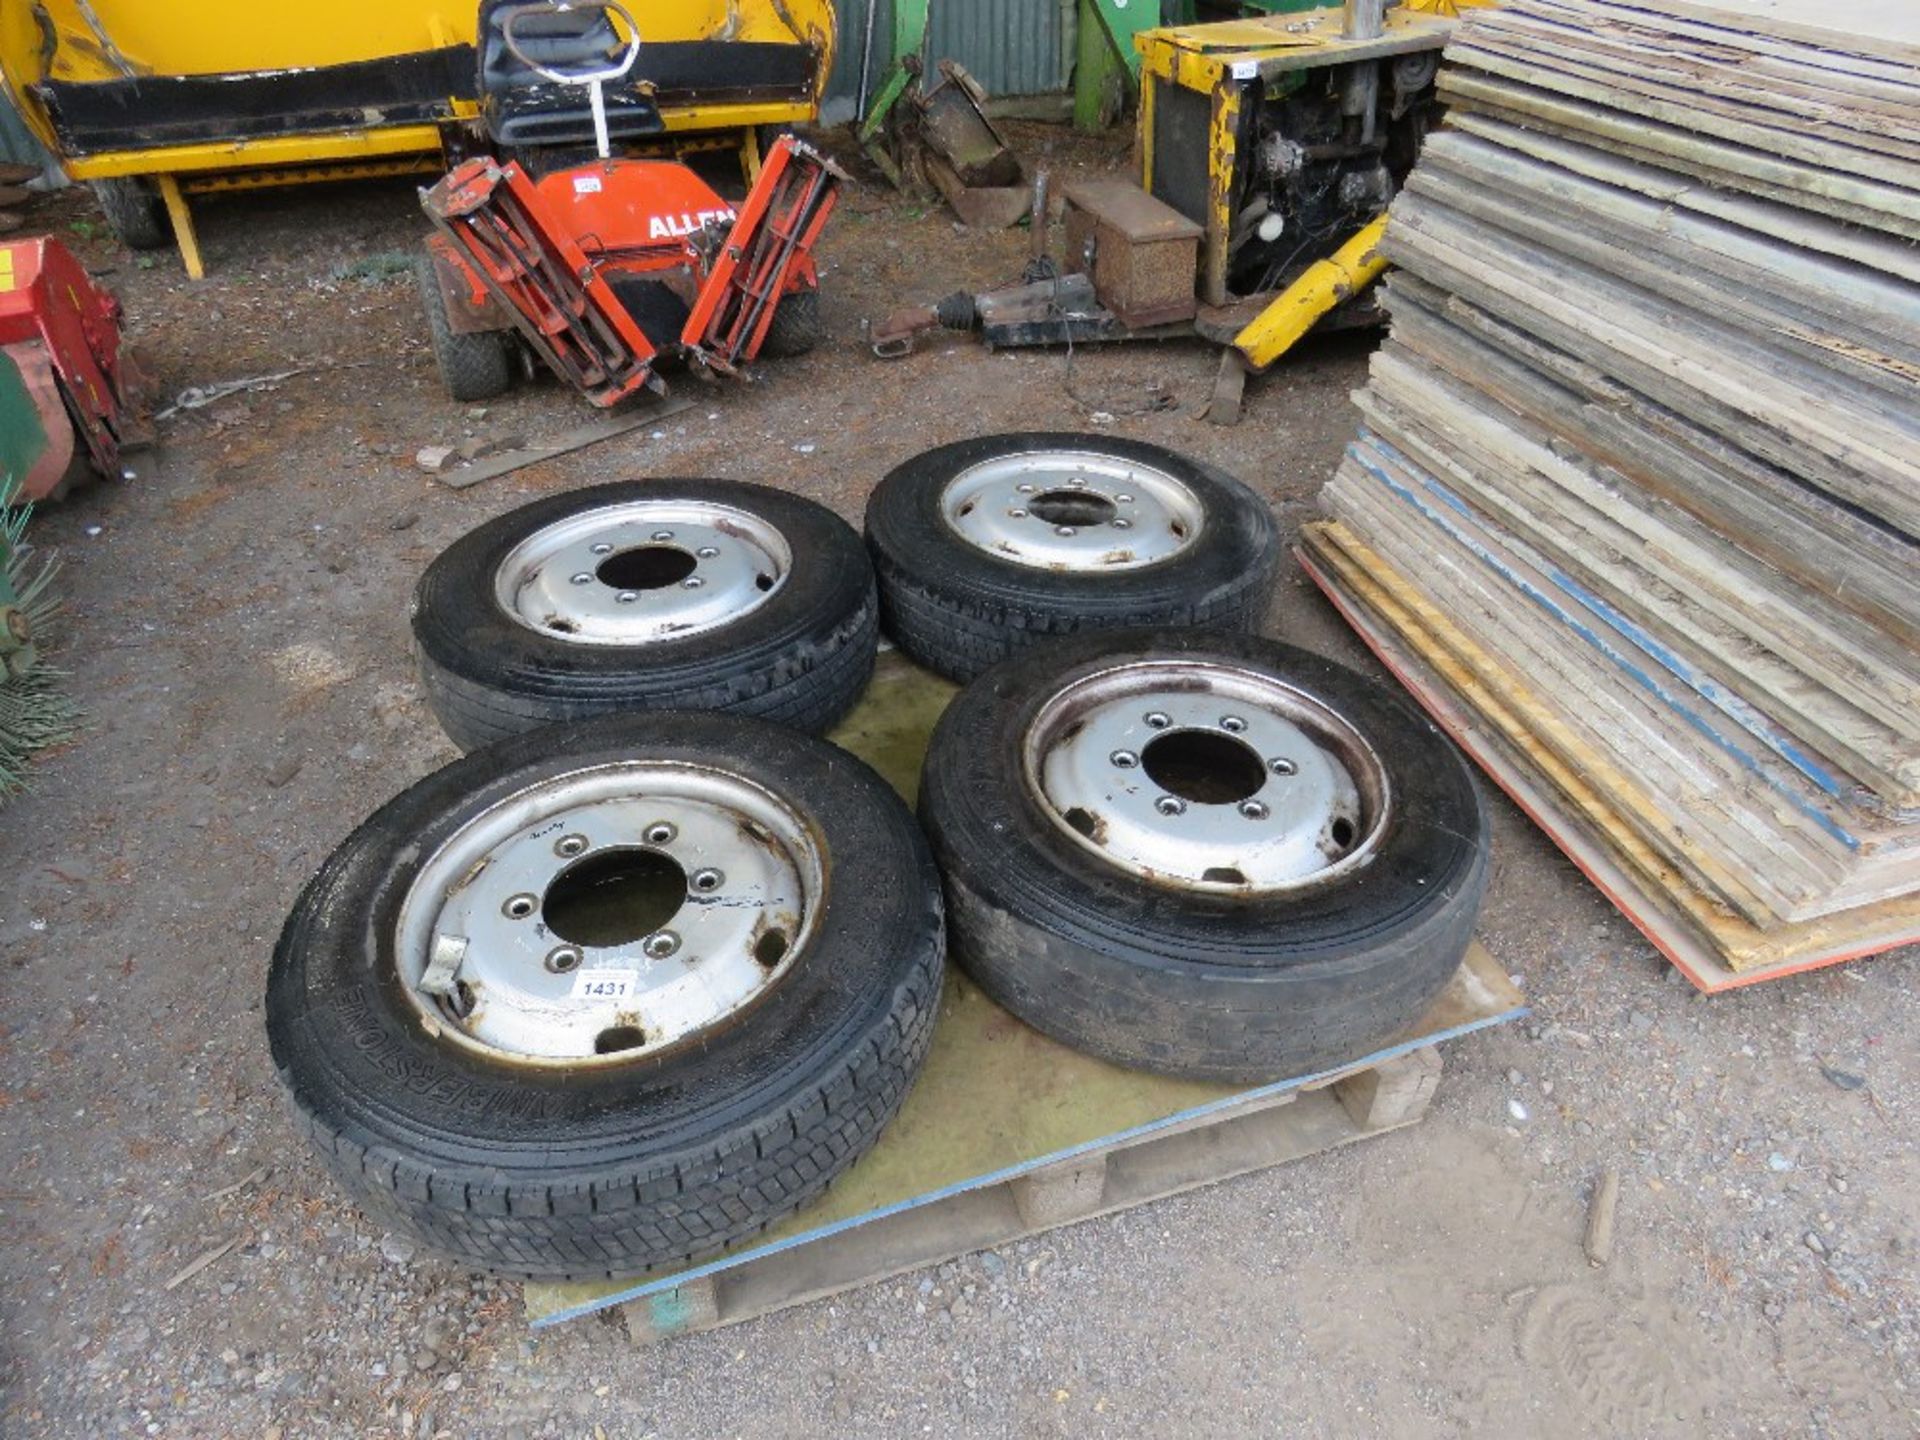 4 X 6 STUD WHEELS AND TYRES, 205/75R17.5 SIZE TYRES. NO VAT ON HAMMER PRICE.